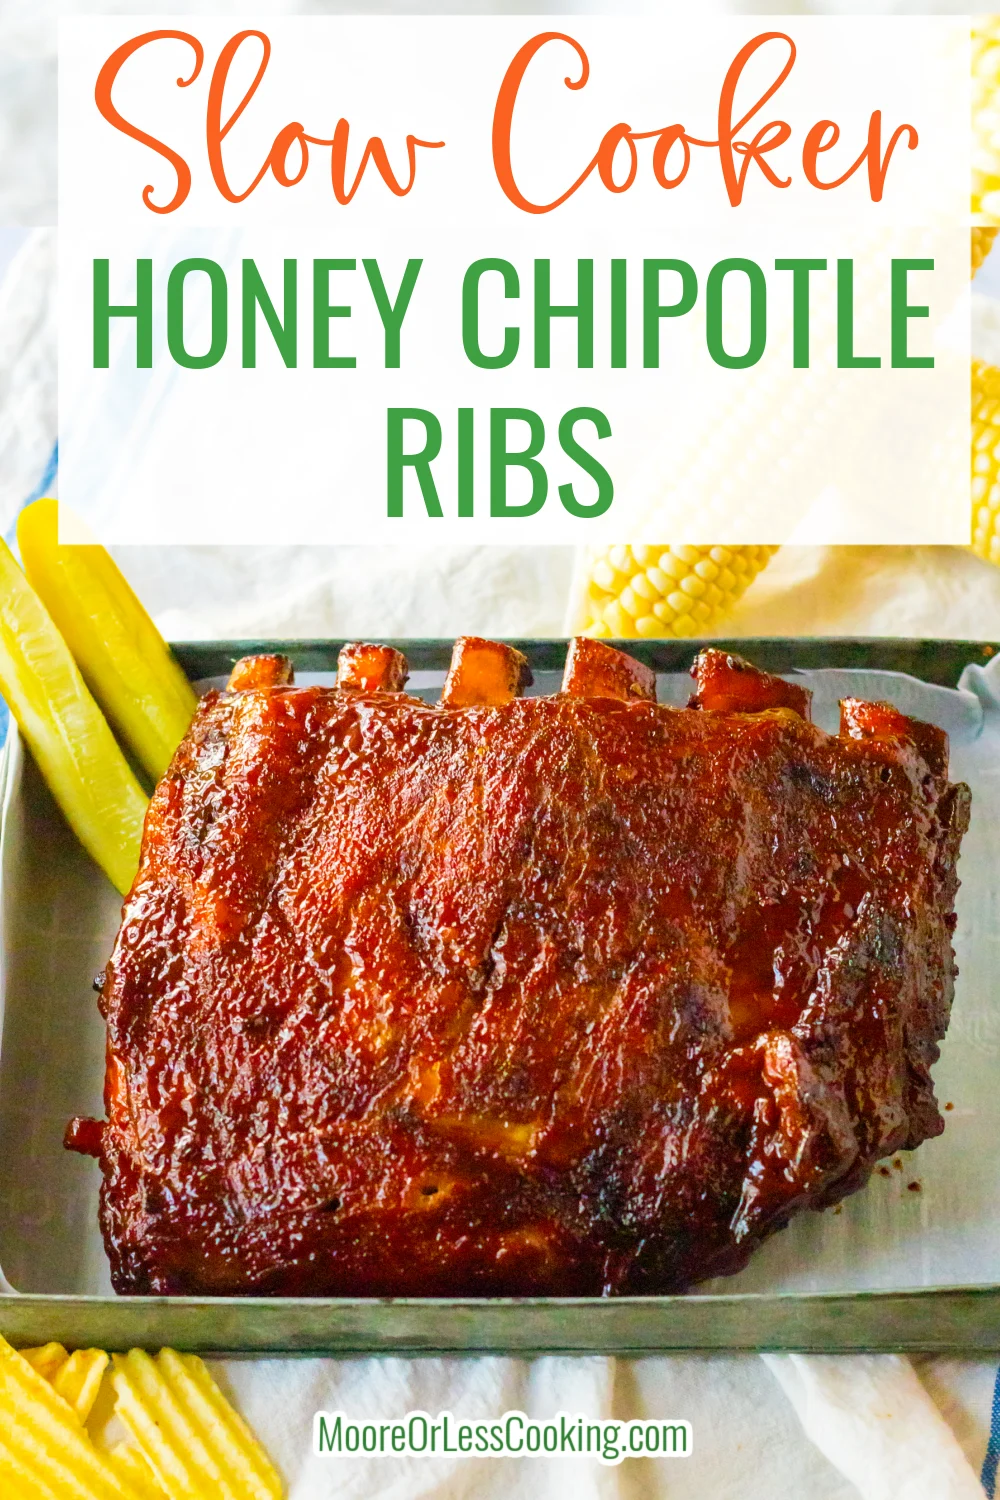 No need to heat up the grill for these tasty ribs - let your slow cooker do all the work of cooking the meat to tender deliciousness. The slow cooking process will help infuse the meat with layers of flavor, making these Honey Chipotle Ribs a meal that will certainly be a family favorite. via @Mooreorlesscook